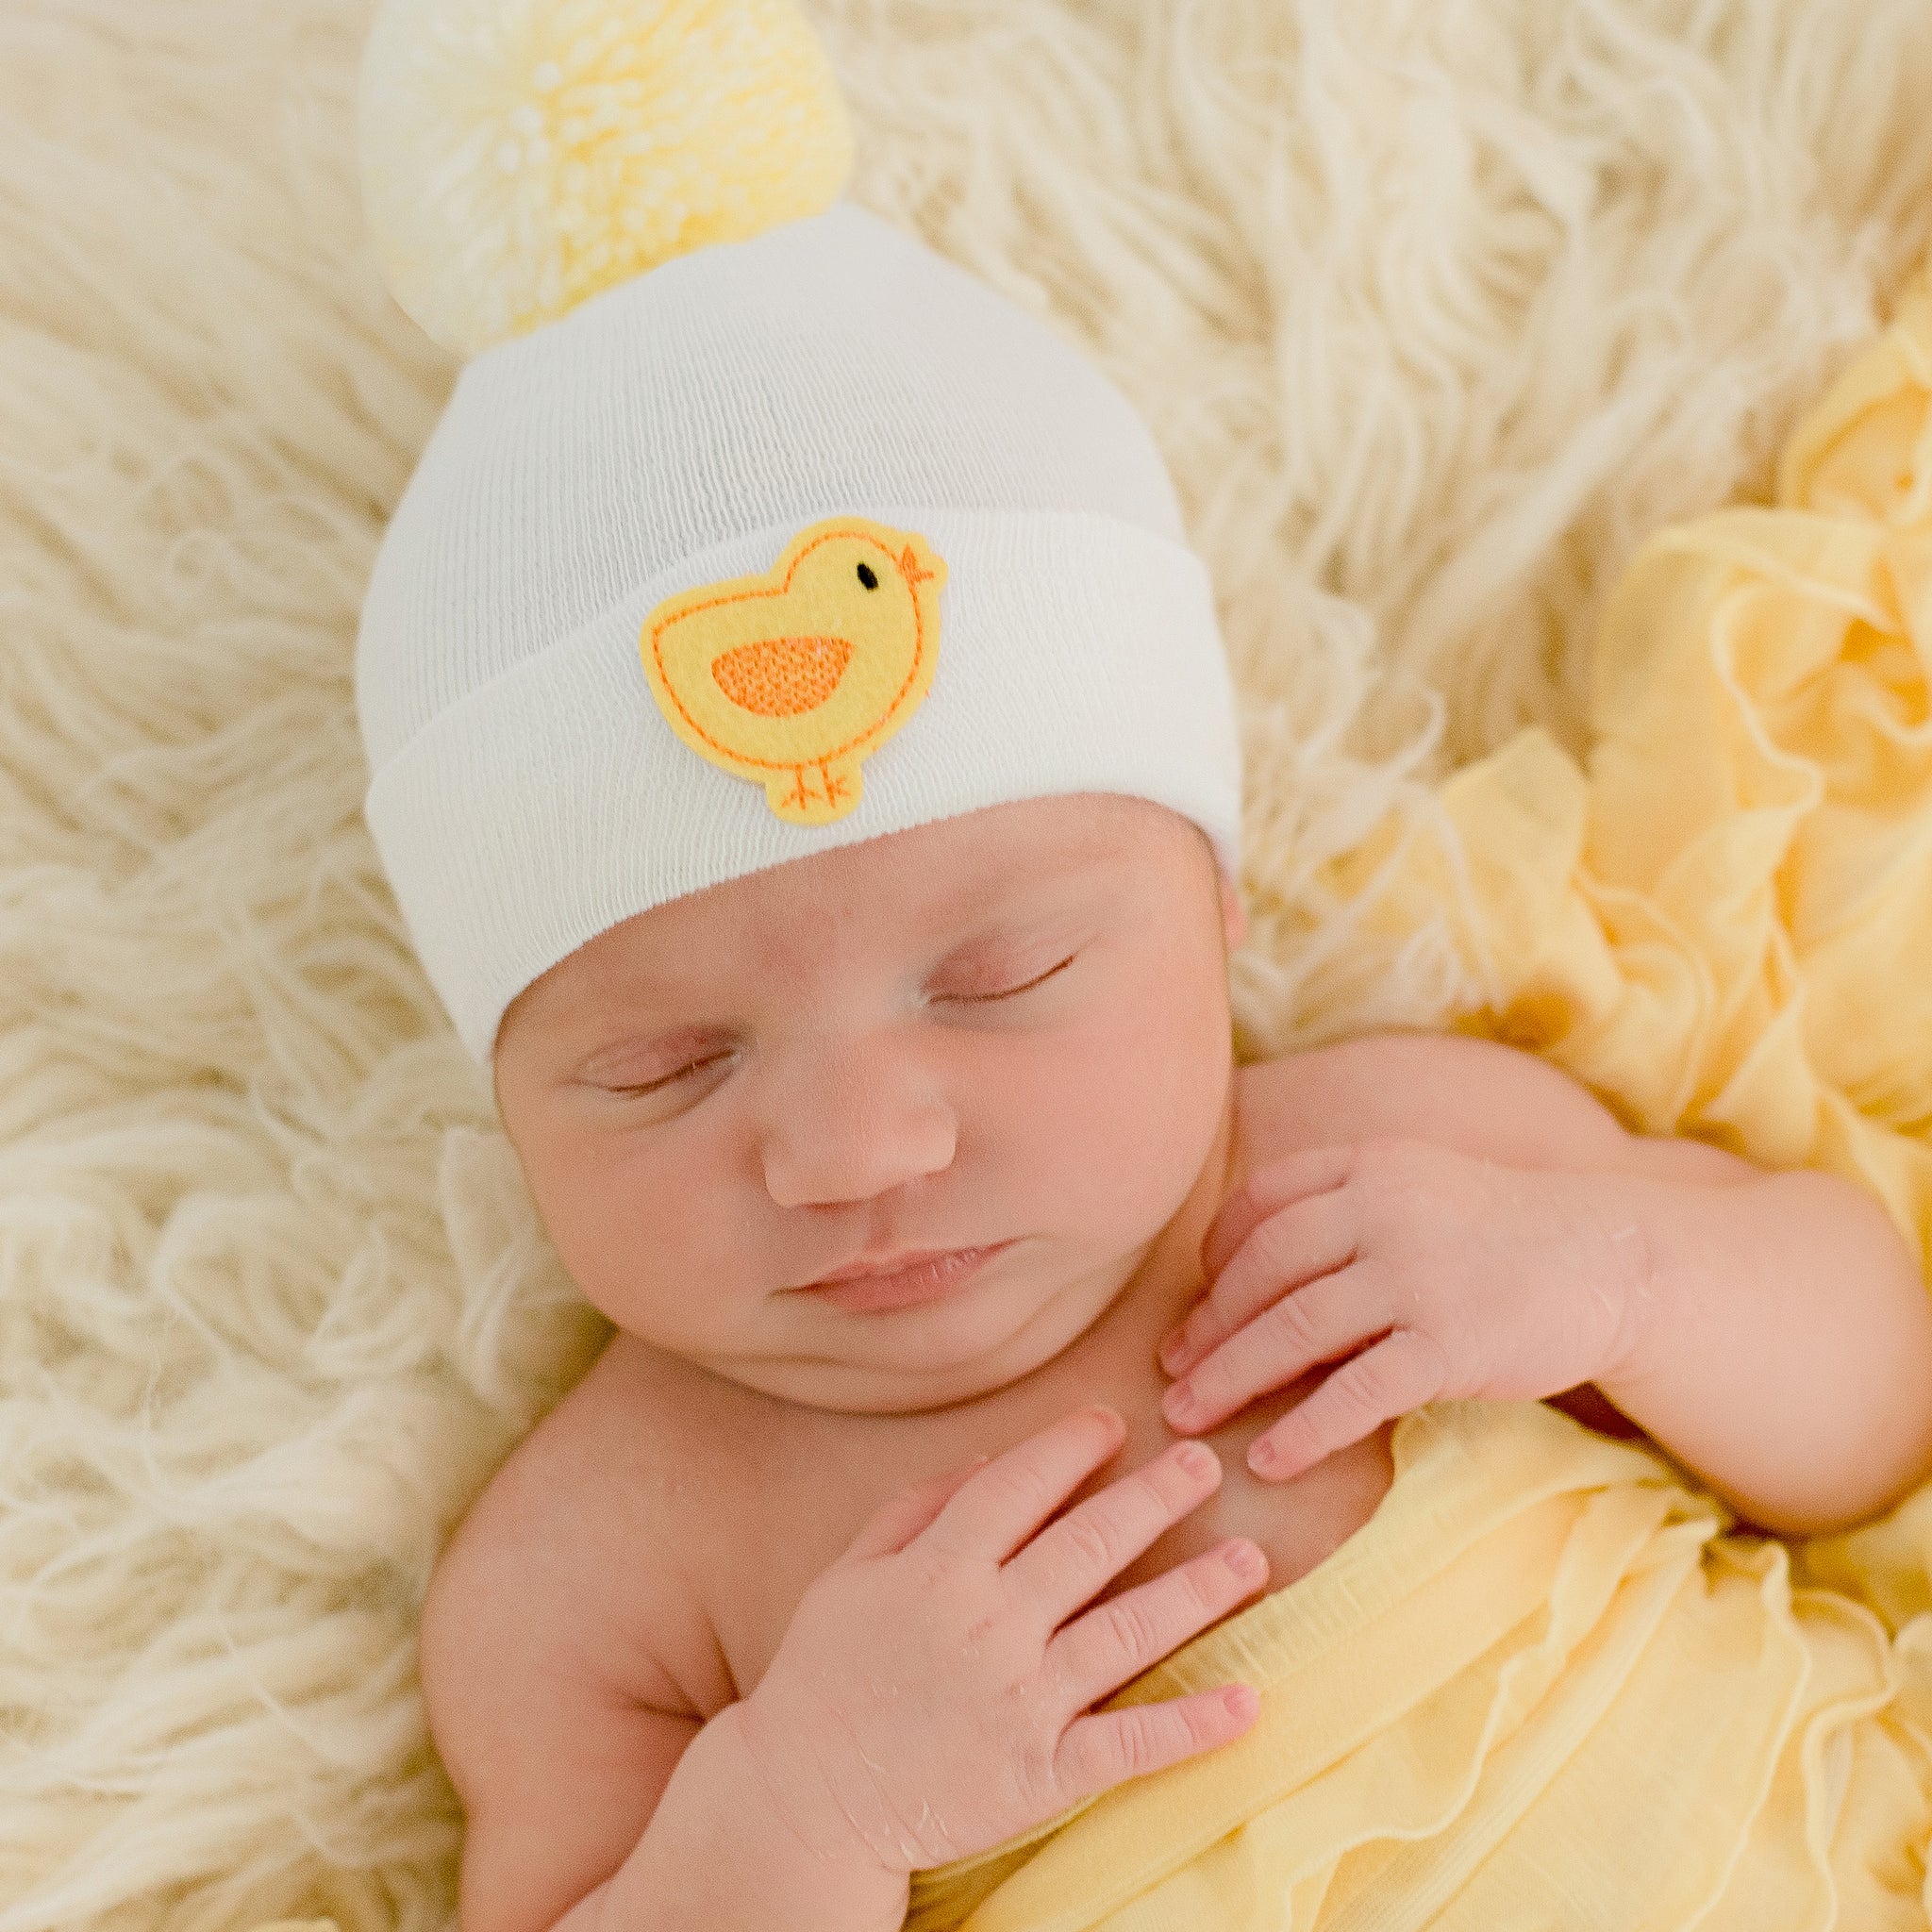 Knitting Newborn Hats for Hospitals - The Make Your Own Zone